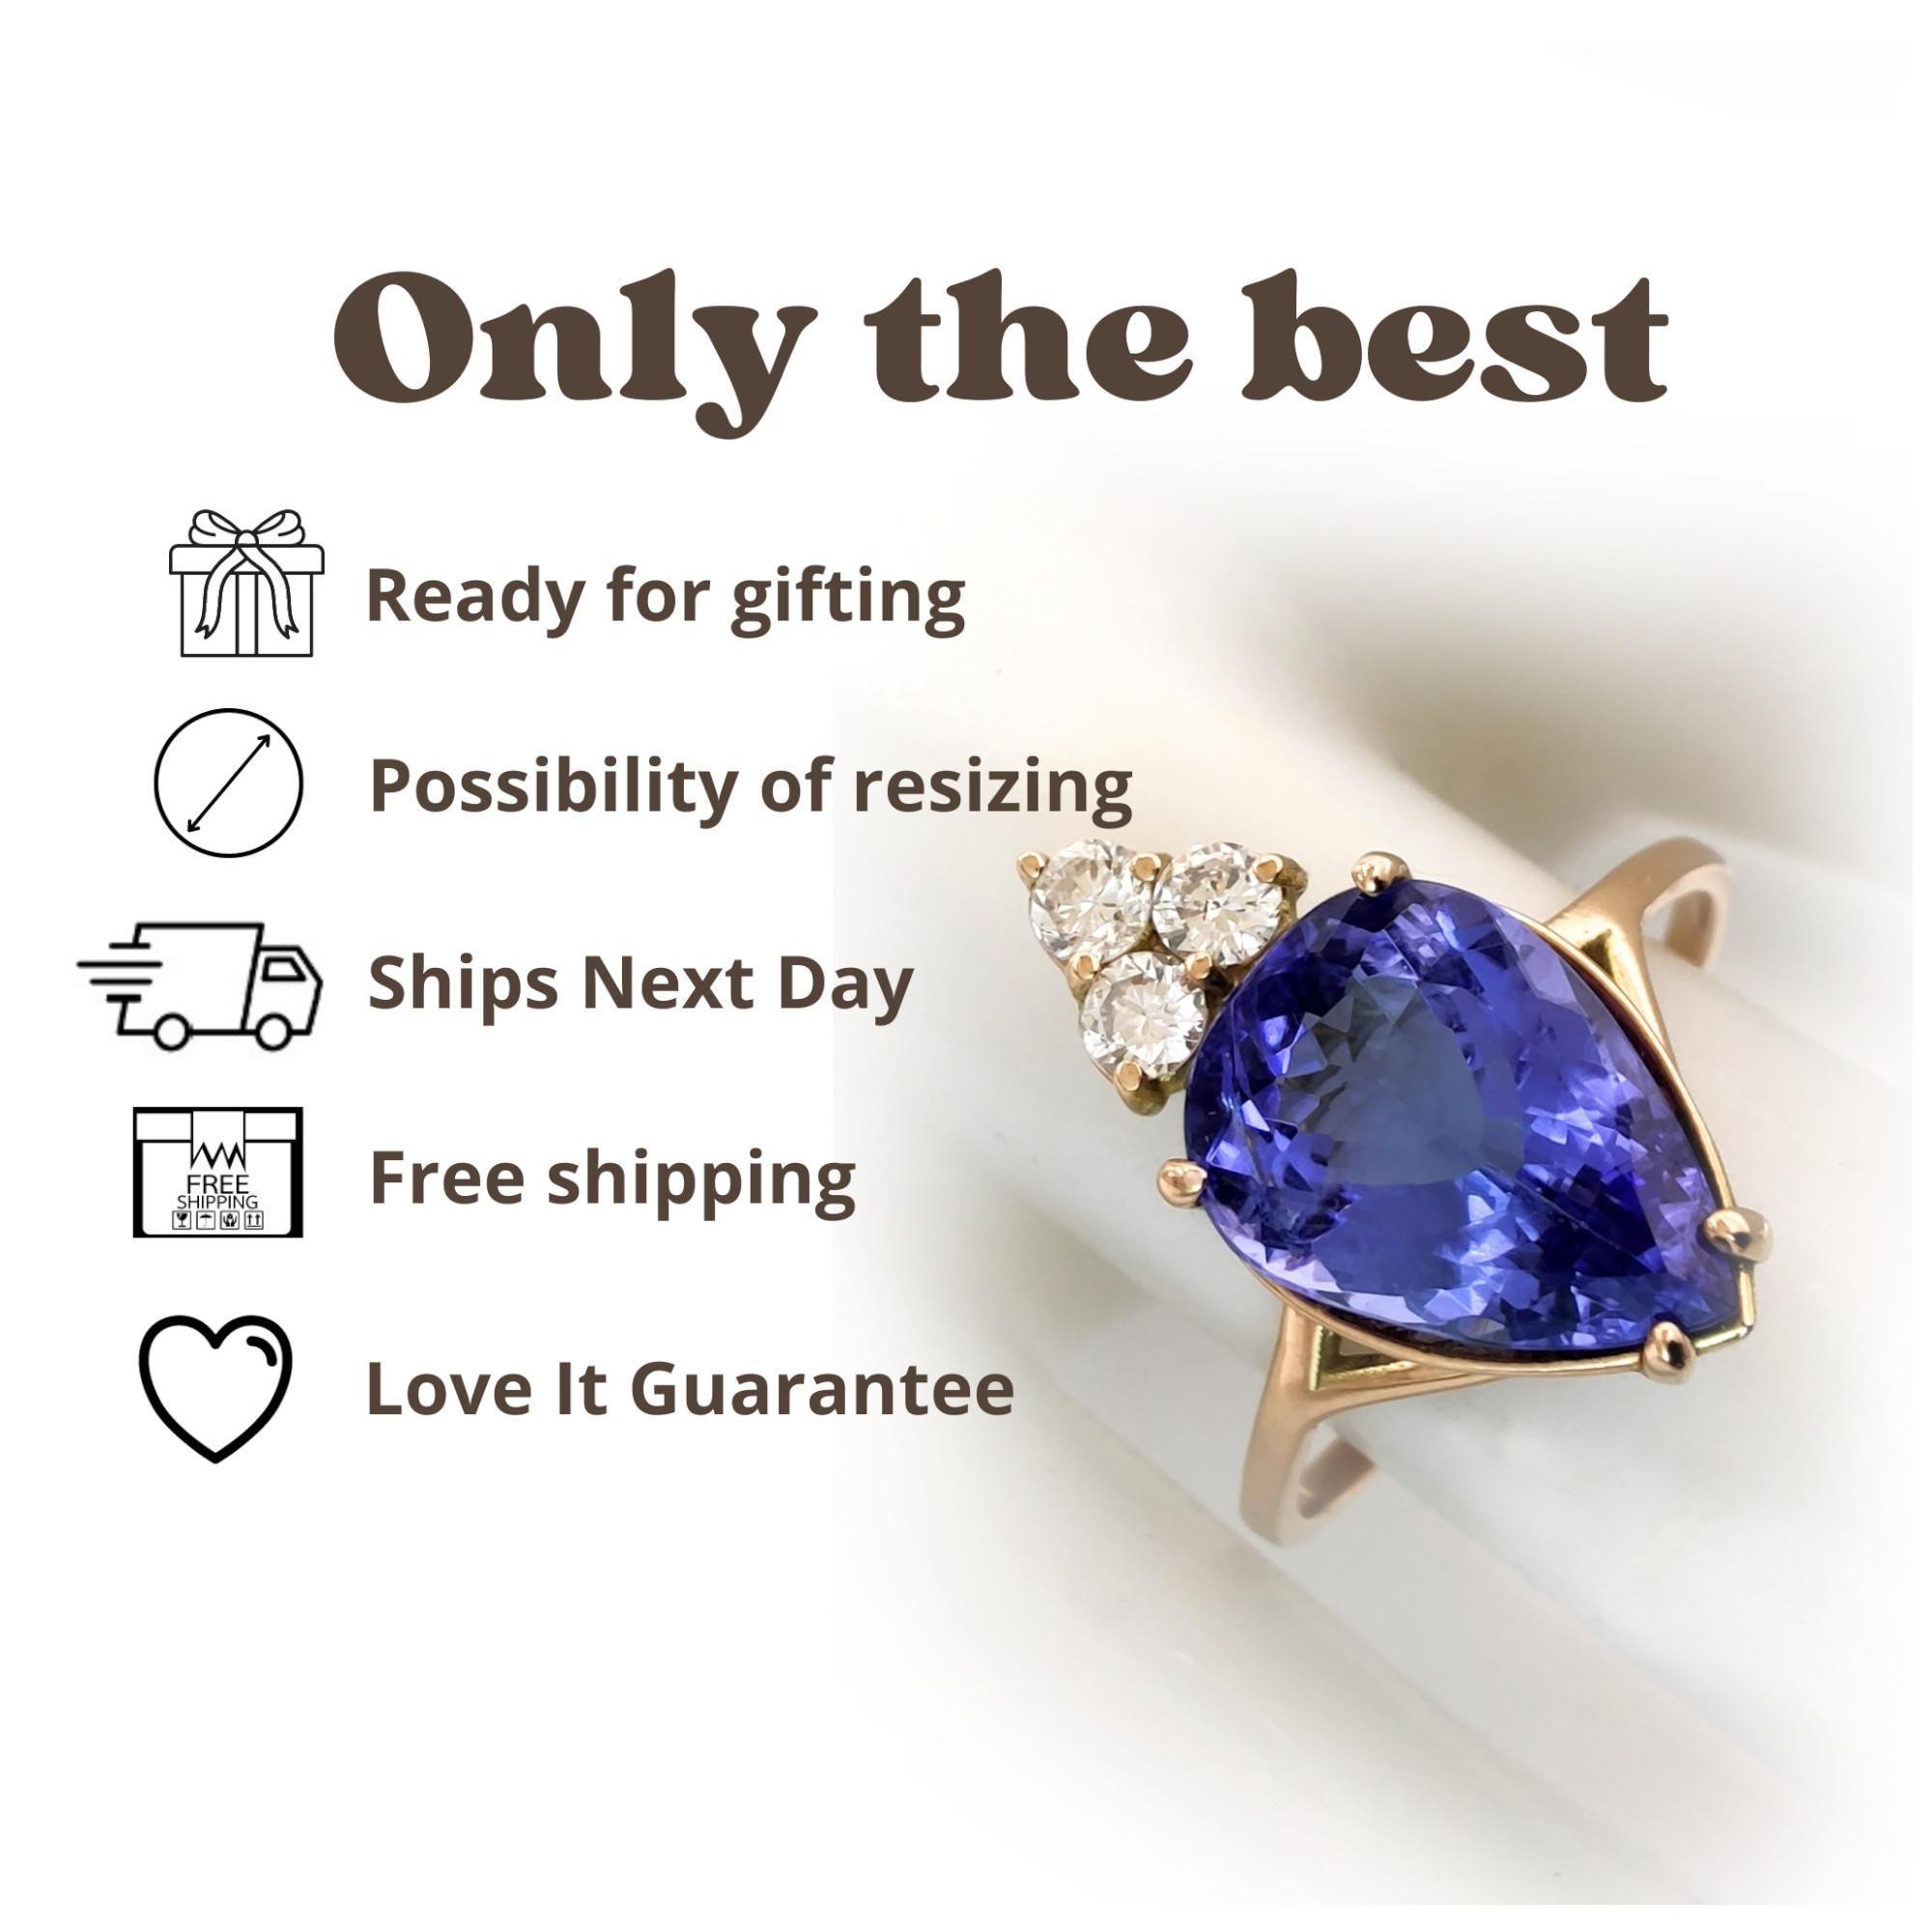 Pear Cut Genuine Certified Tanzanite Diamond Ring-Exquisite Jewelry for Everyday Elegance For Sale